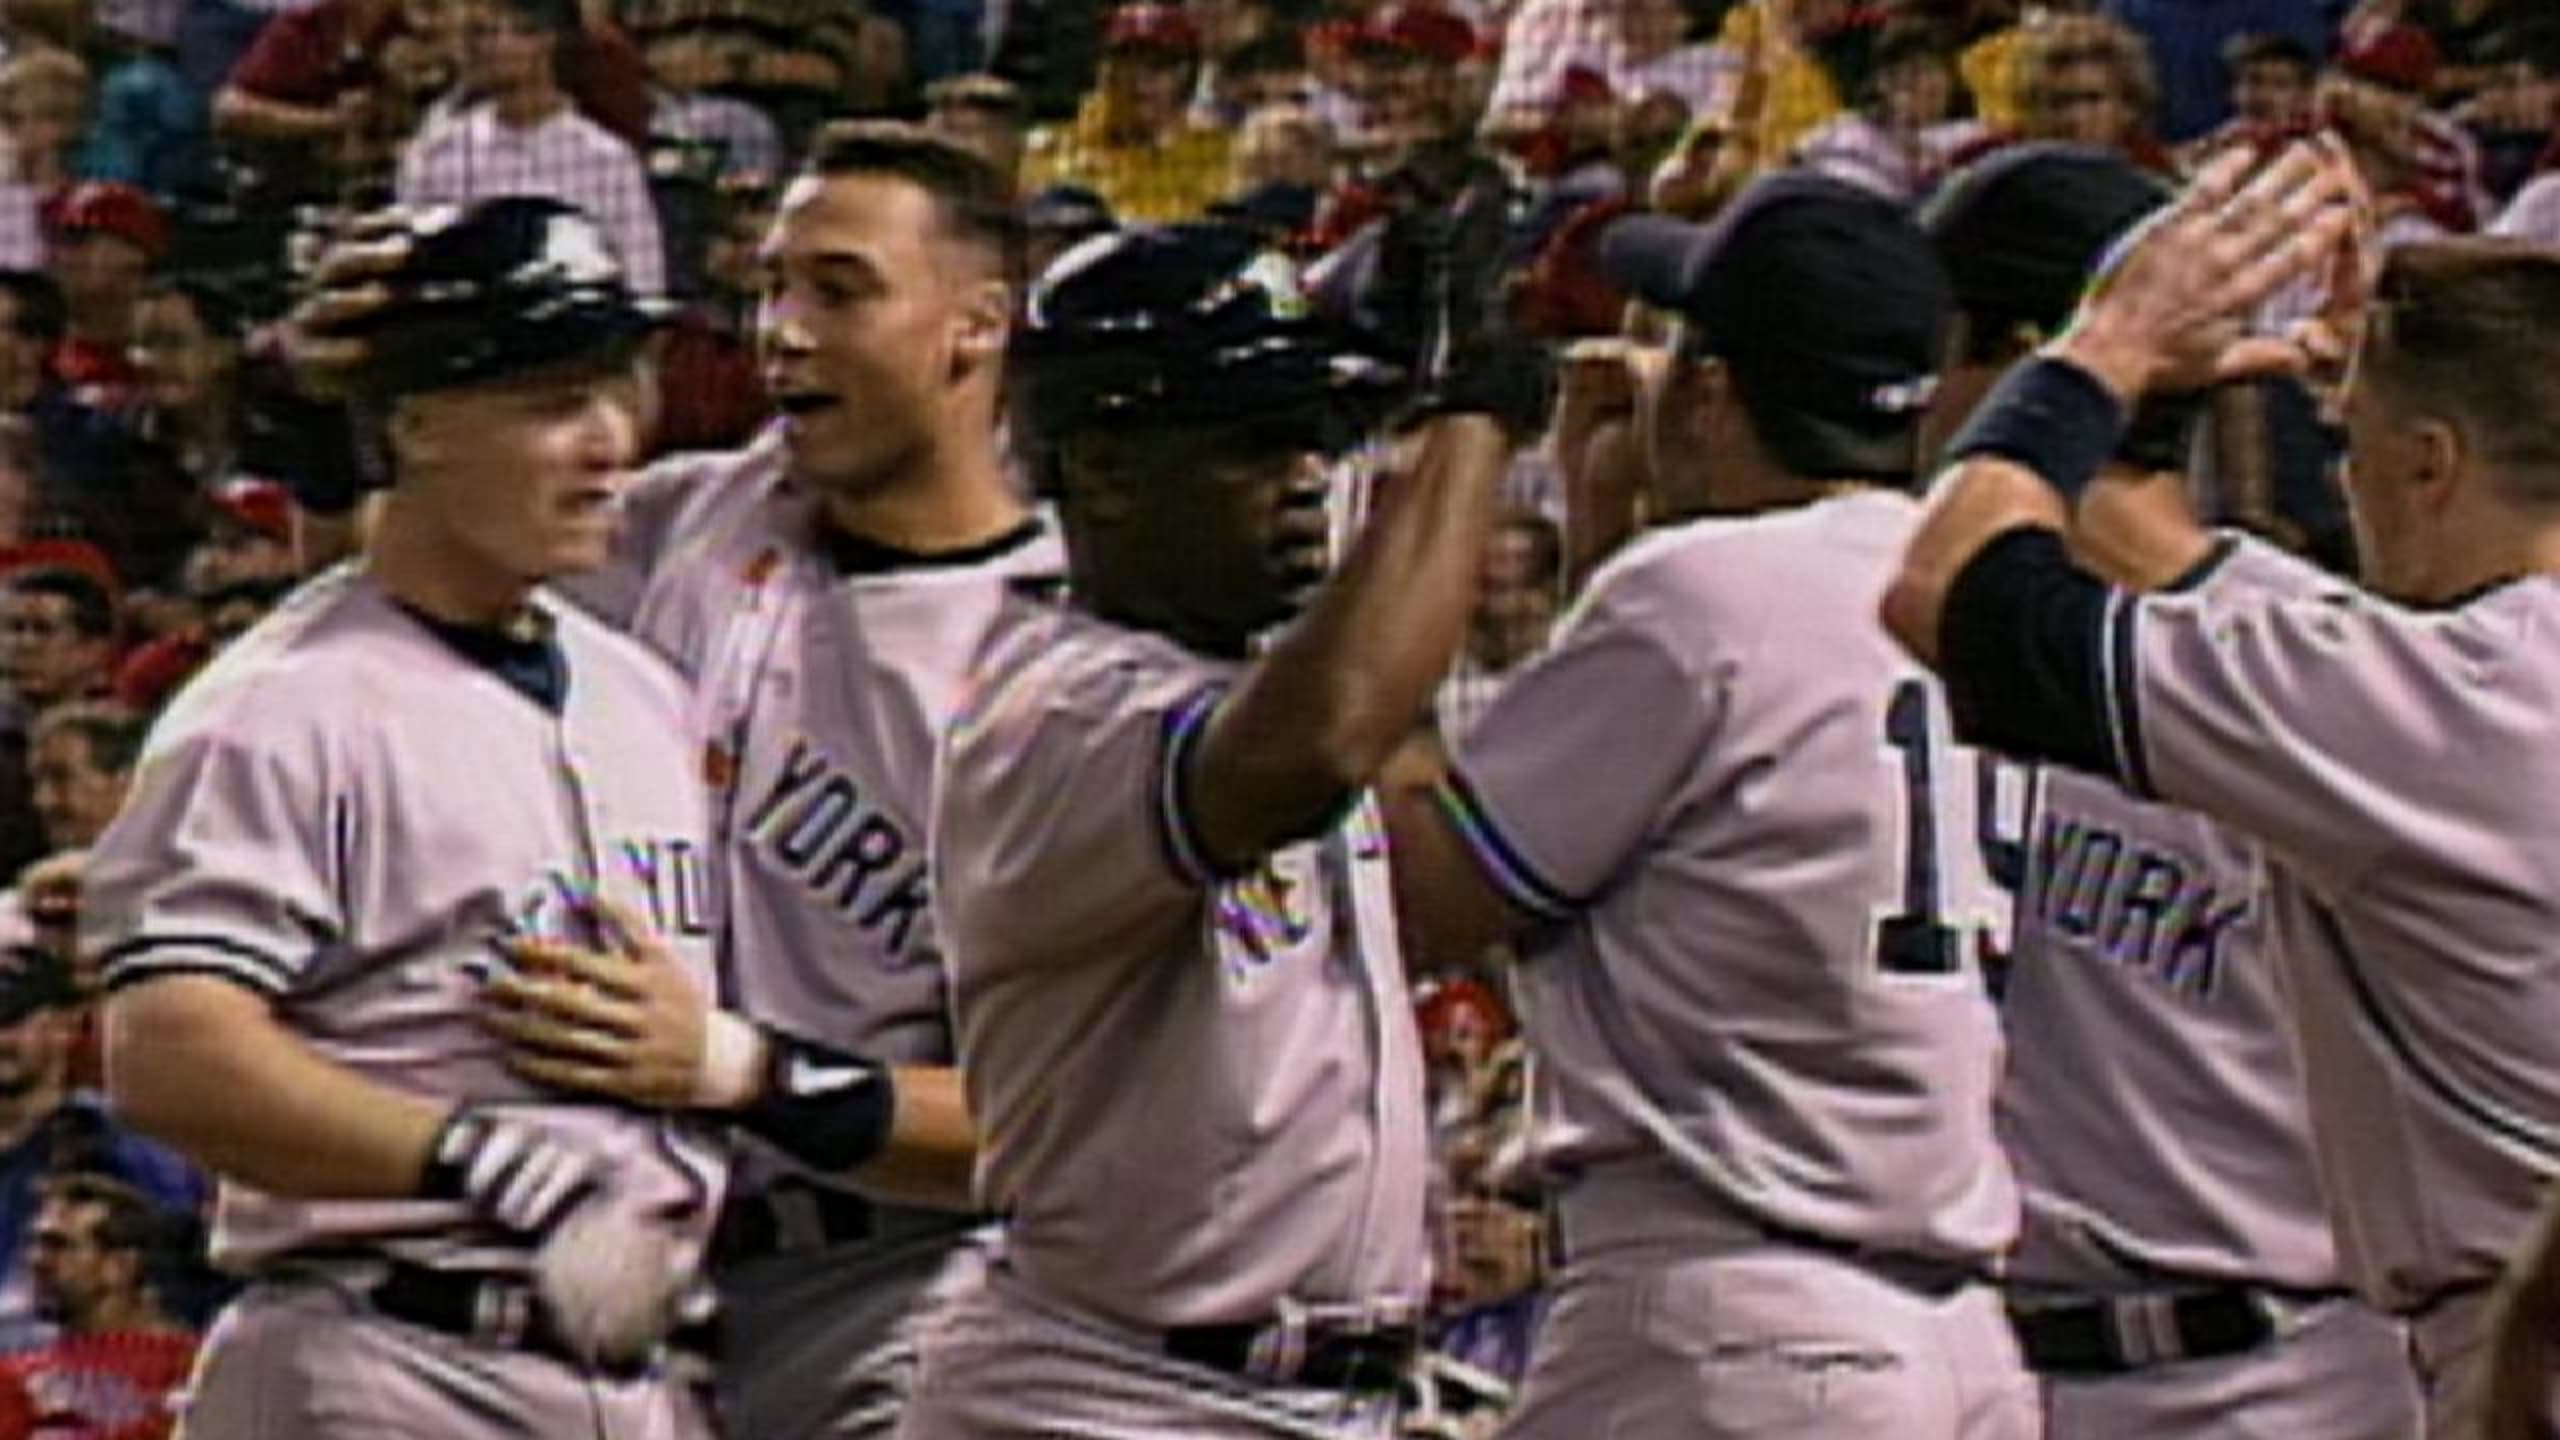 1998 Yankees Diary: Bombers squander chance to sweep Mariners